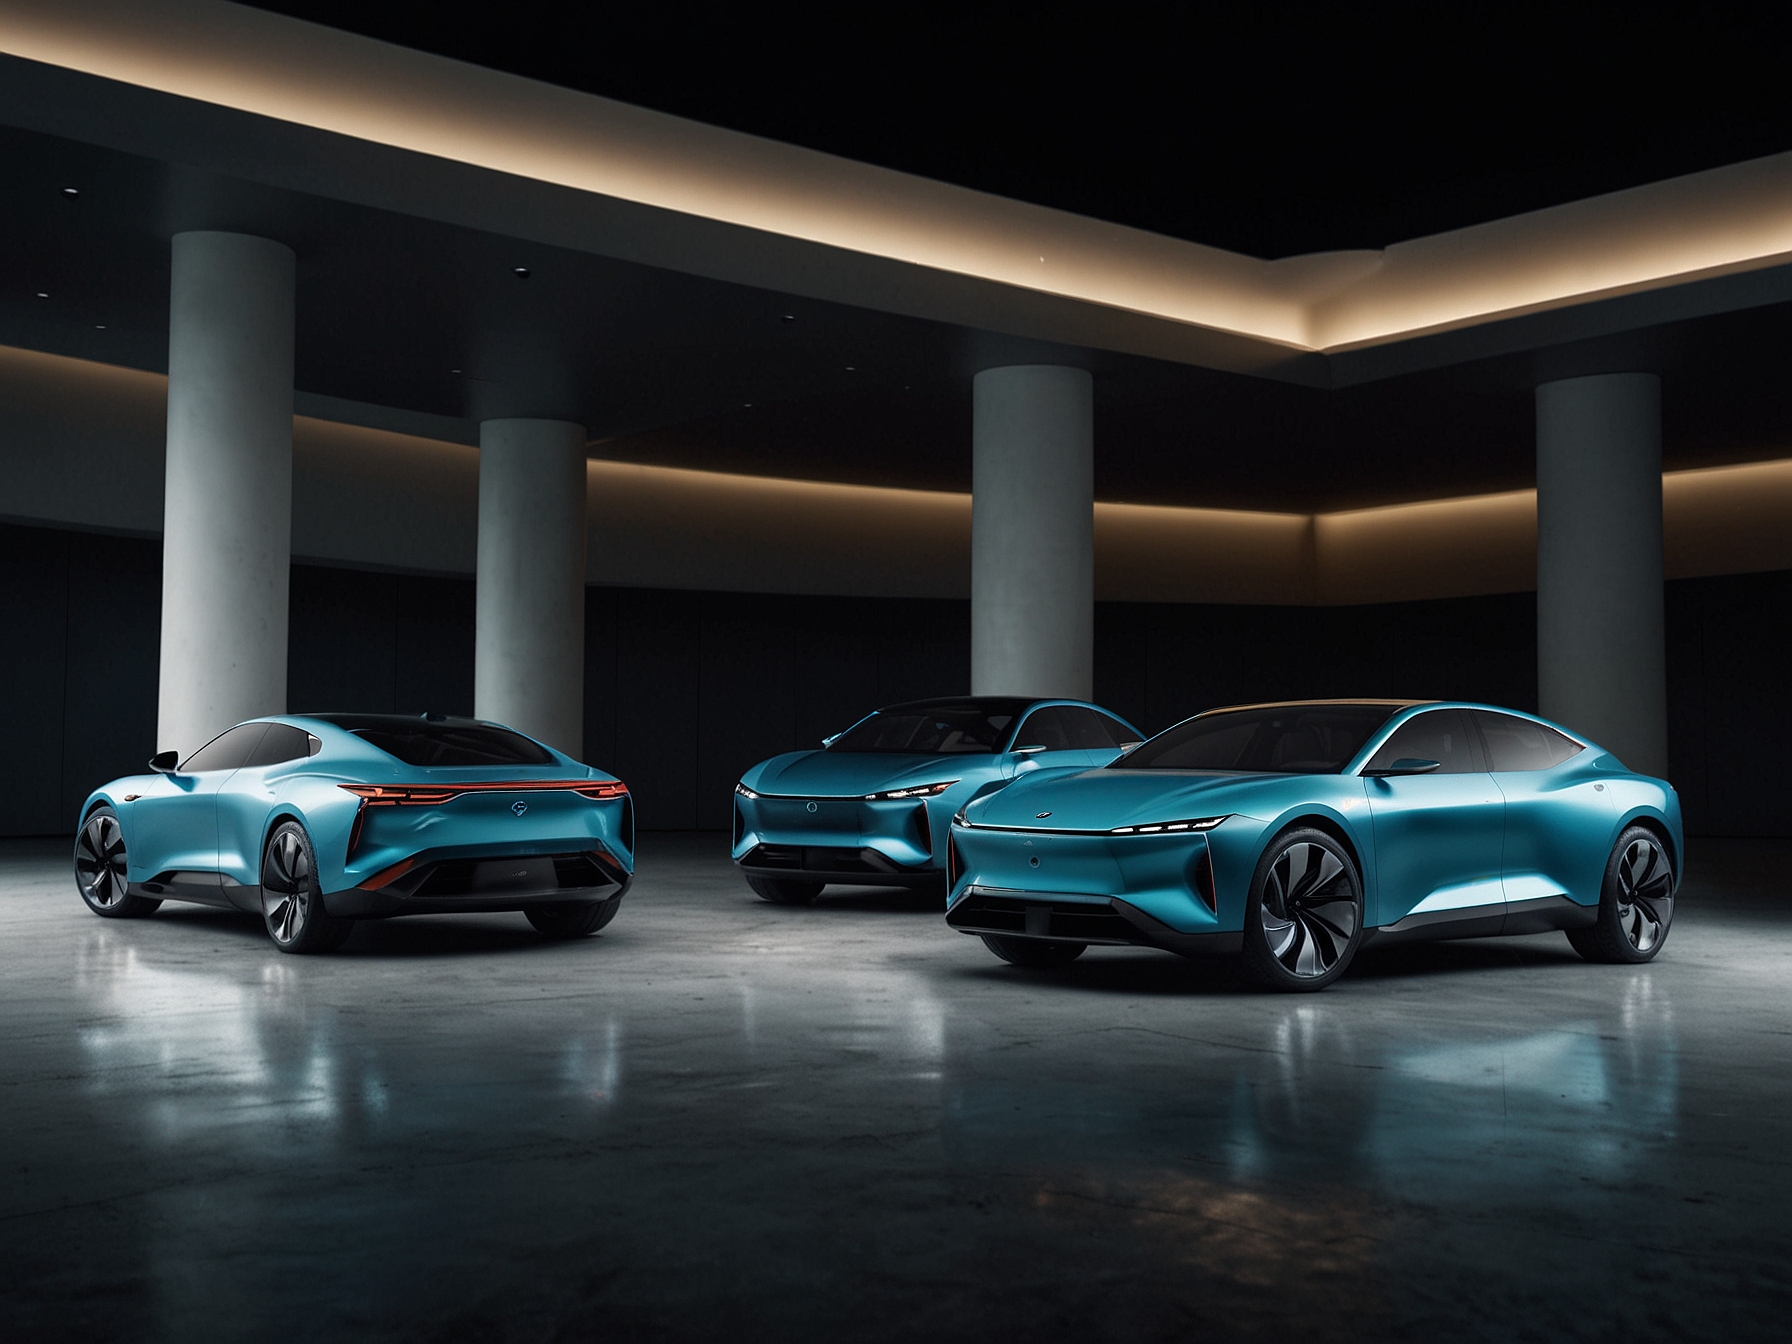 An image showcasing NIO's cutting-edge electric vehicle models, such as the ES8, ES6, and EC6, highlighting their innovative design, advanced technology, and autonomous driving capabilities.